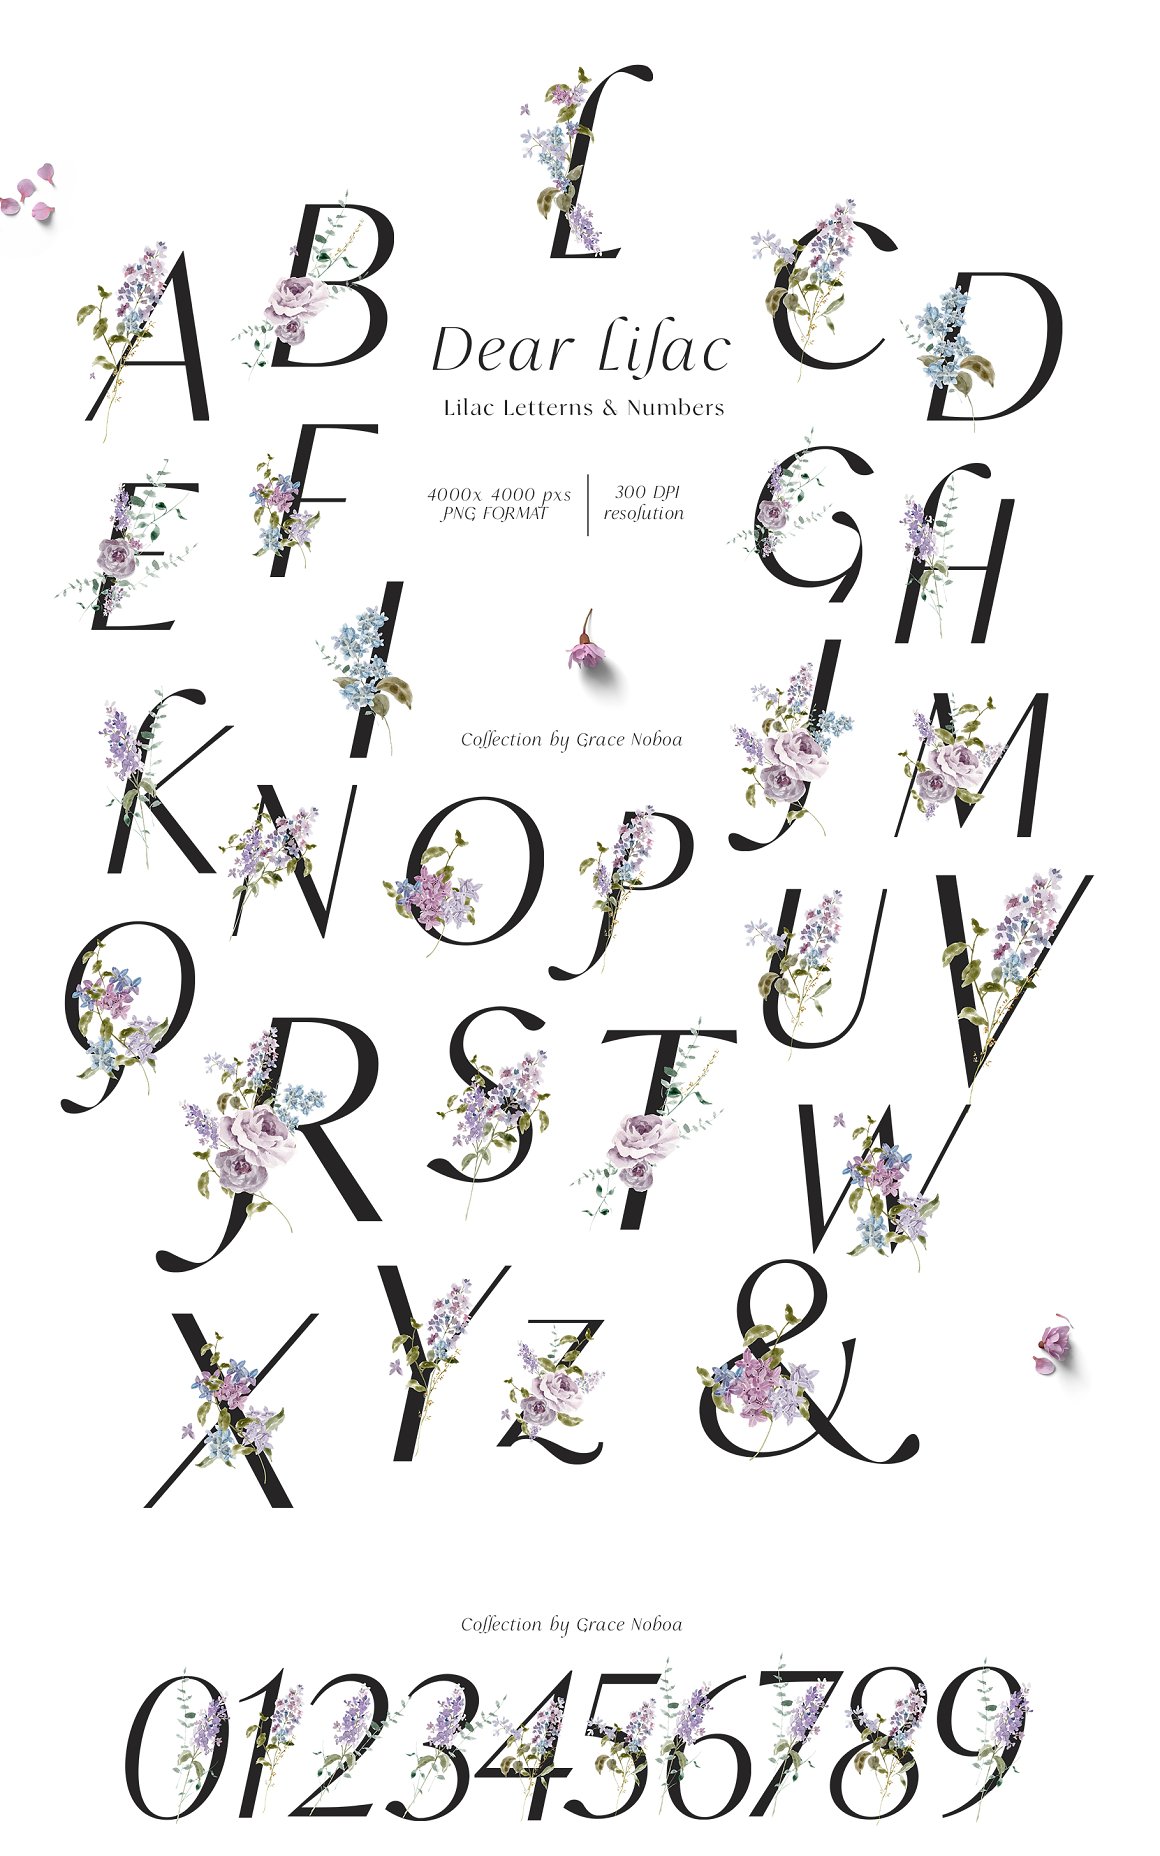 Alphabet with flowers on dark letters.